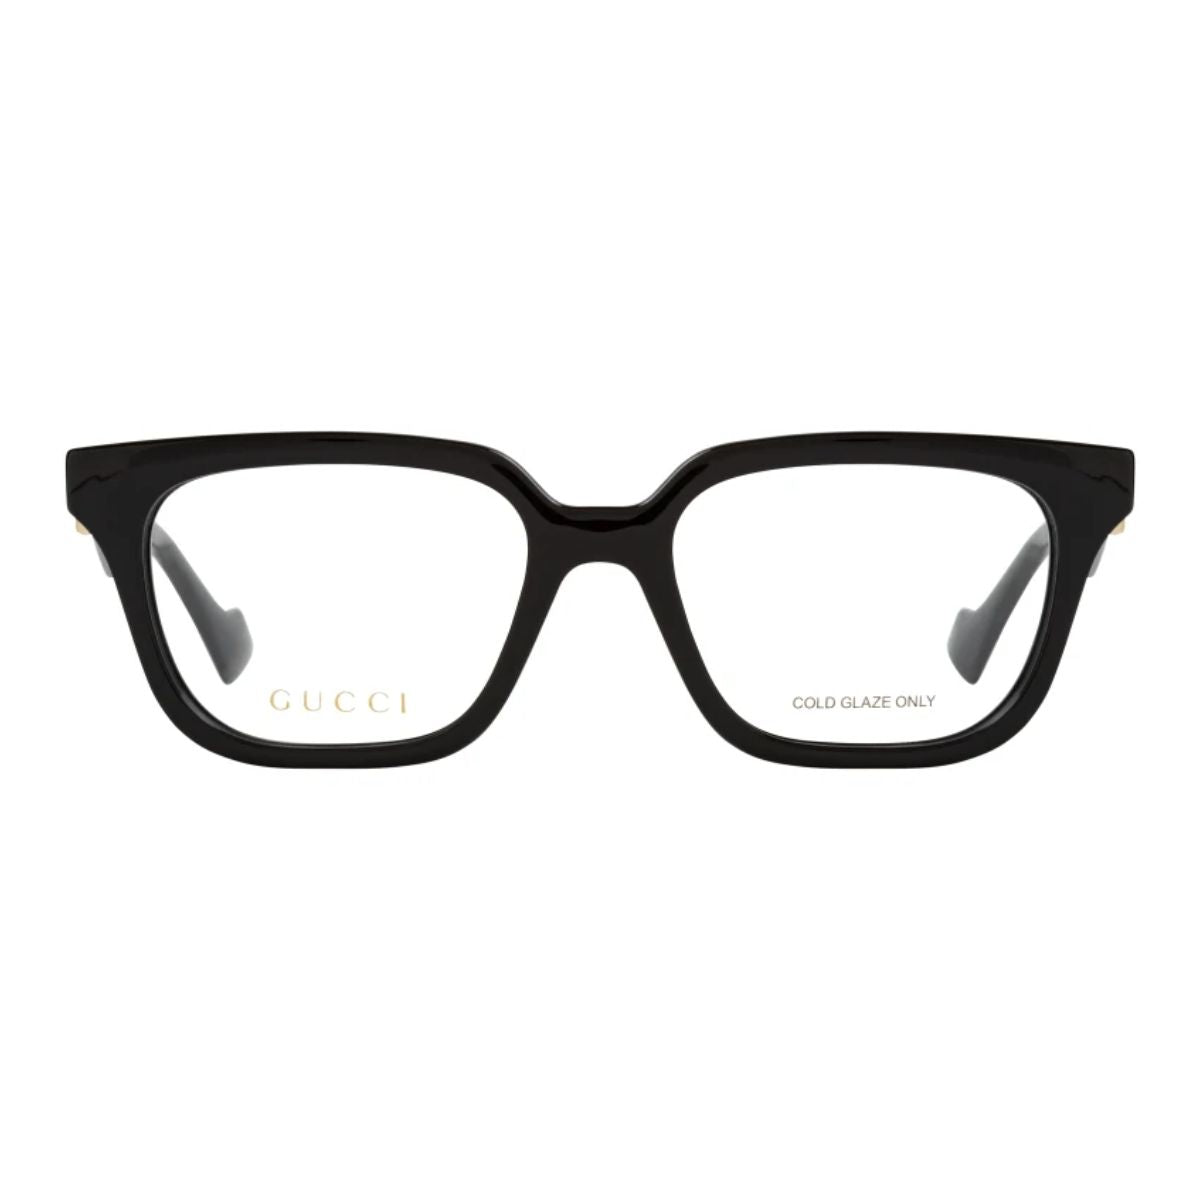 "Gucci 1536O 001 Frames for Women - Optorium's Online Store"